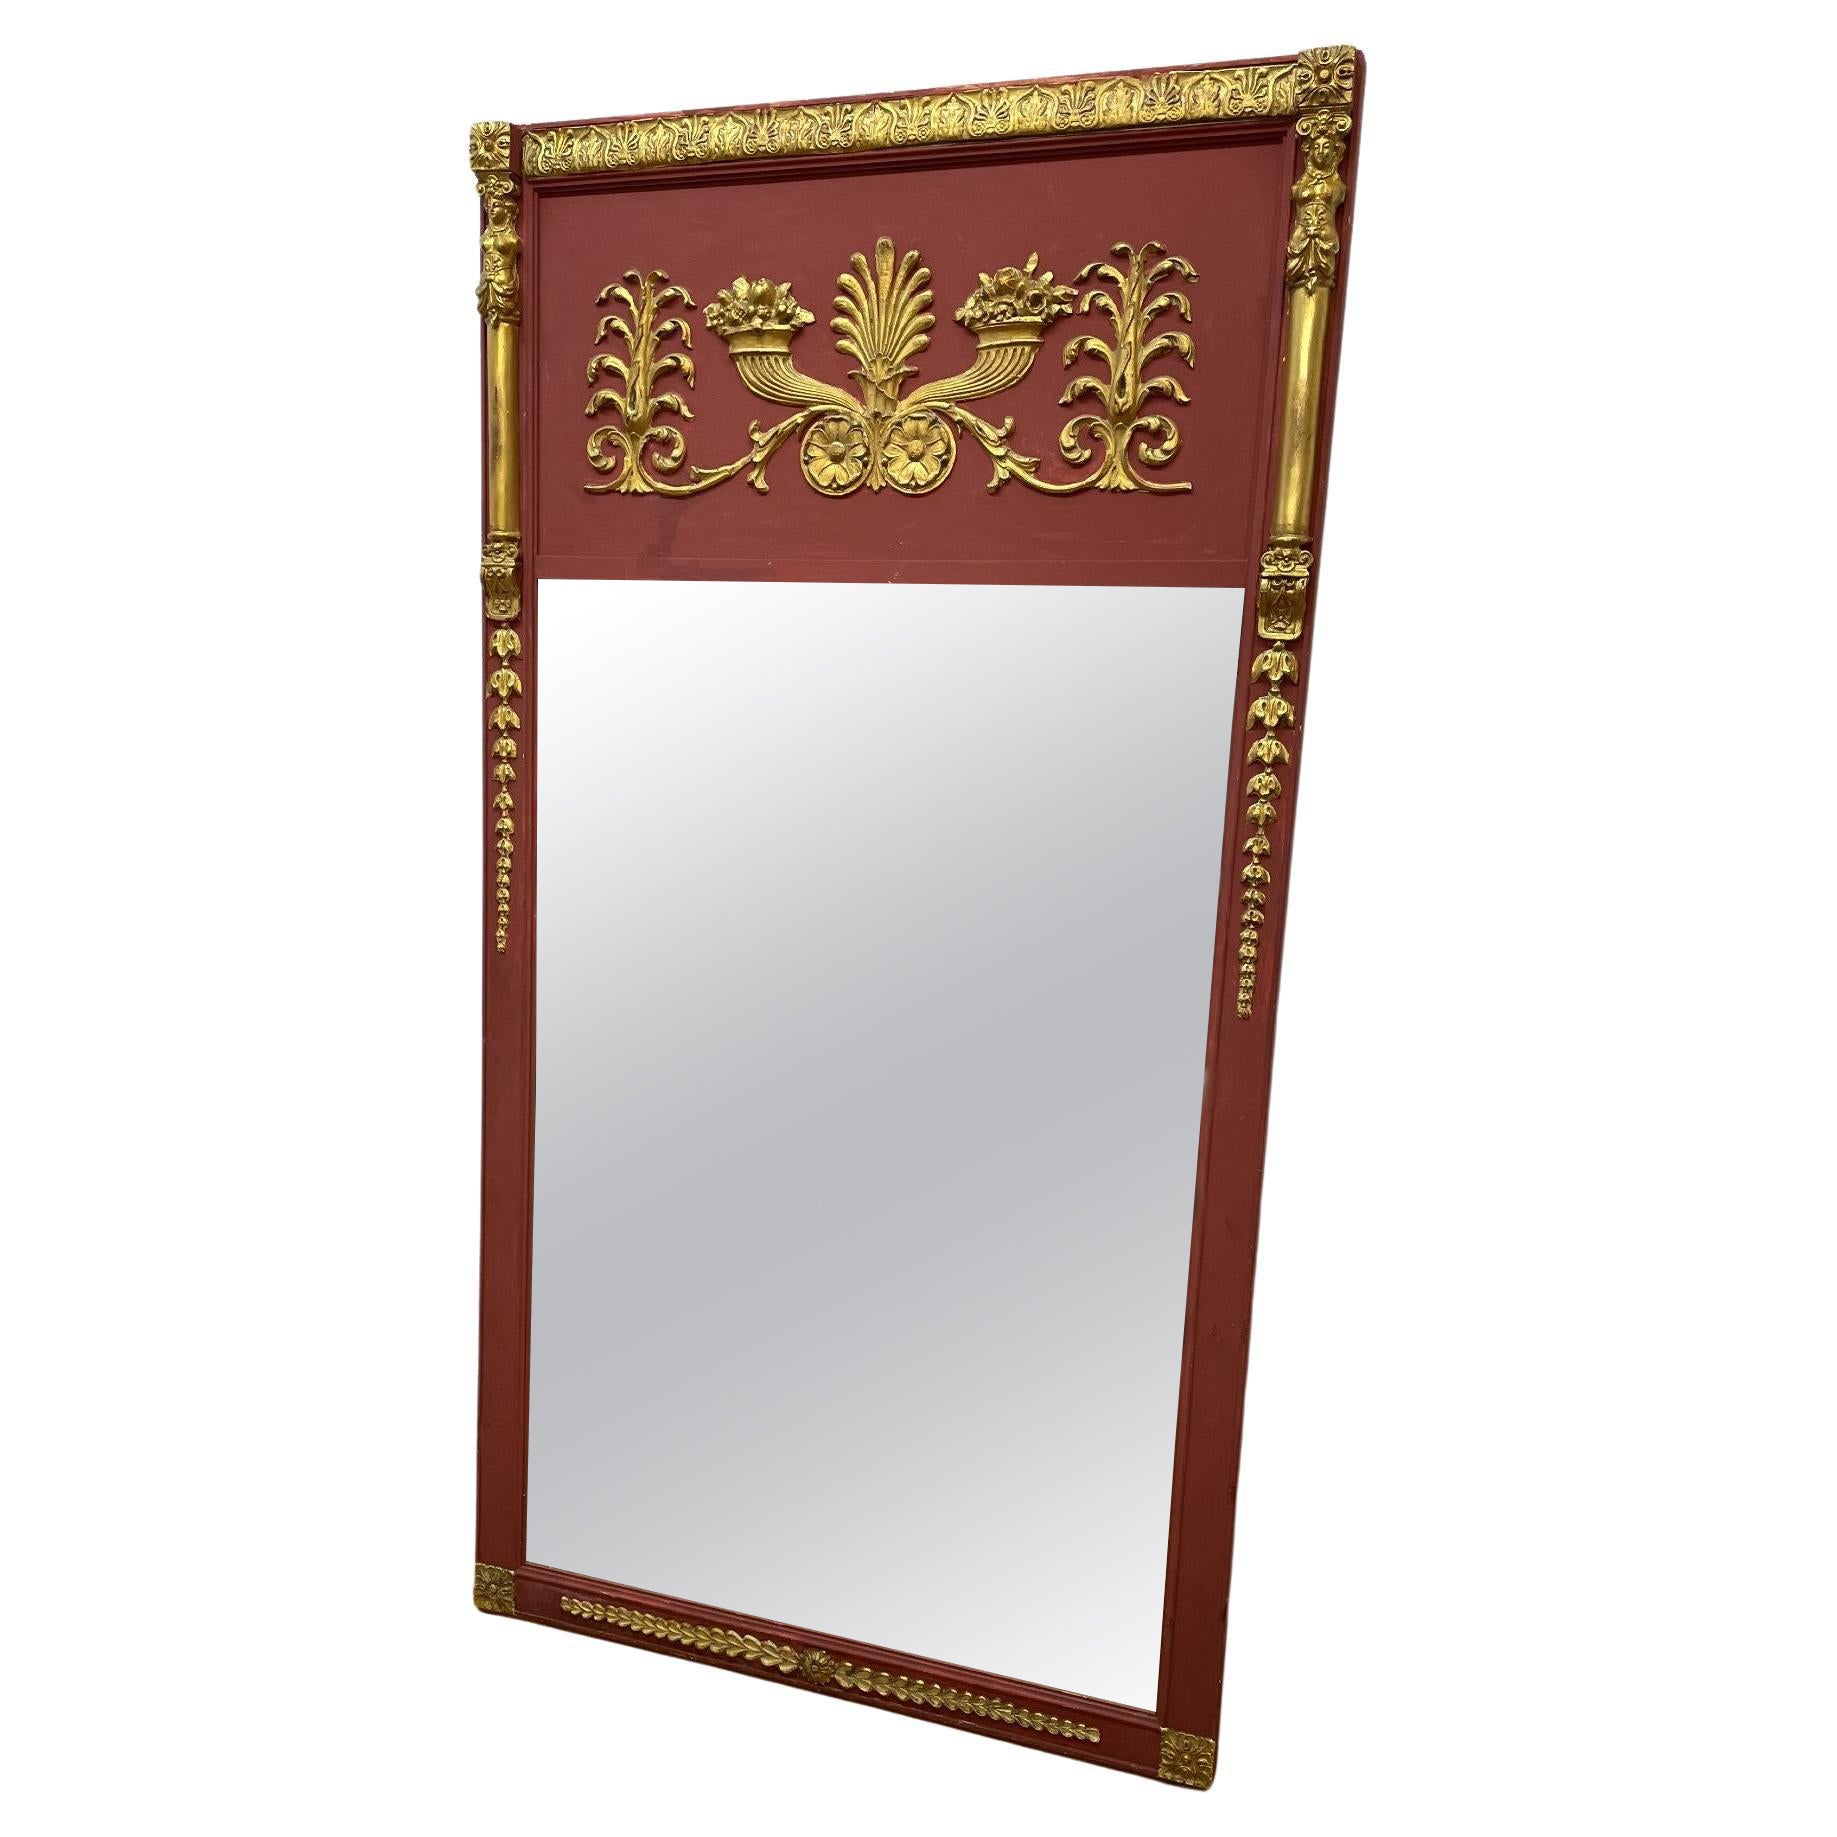 Neo-Classical Gilded and Red Painted Mirror With Cornucopia Design